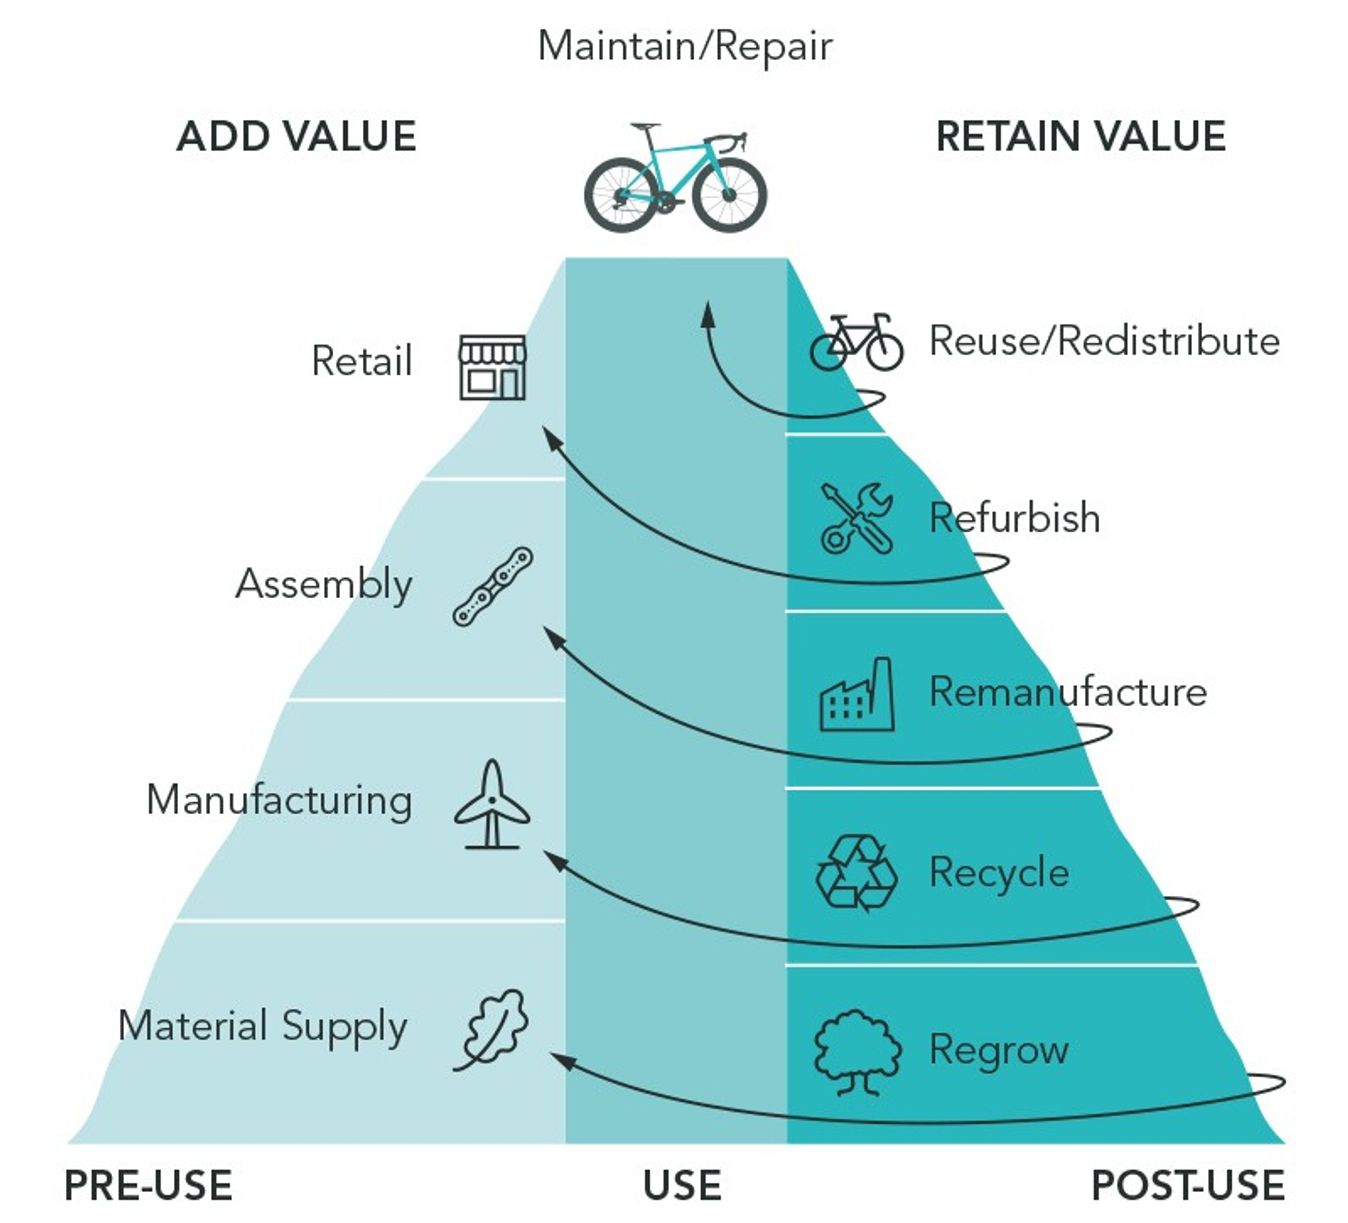 In a circular economy, products are reused, which is also relies on the materials used and the production processes